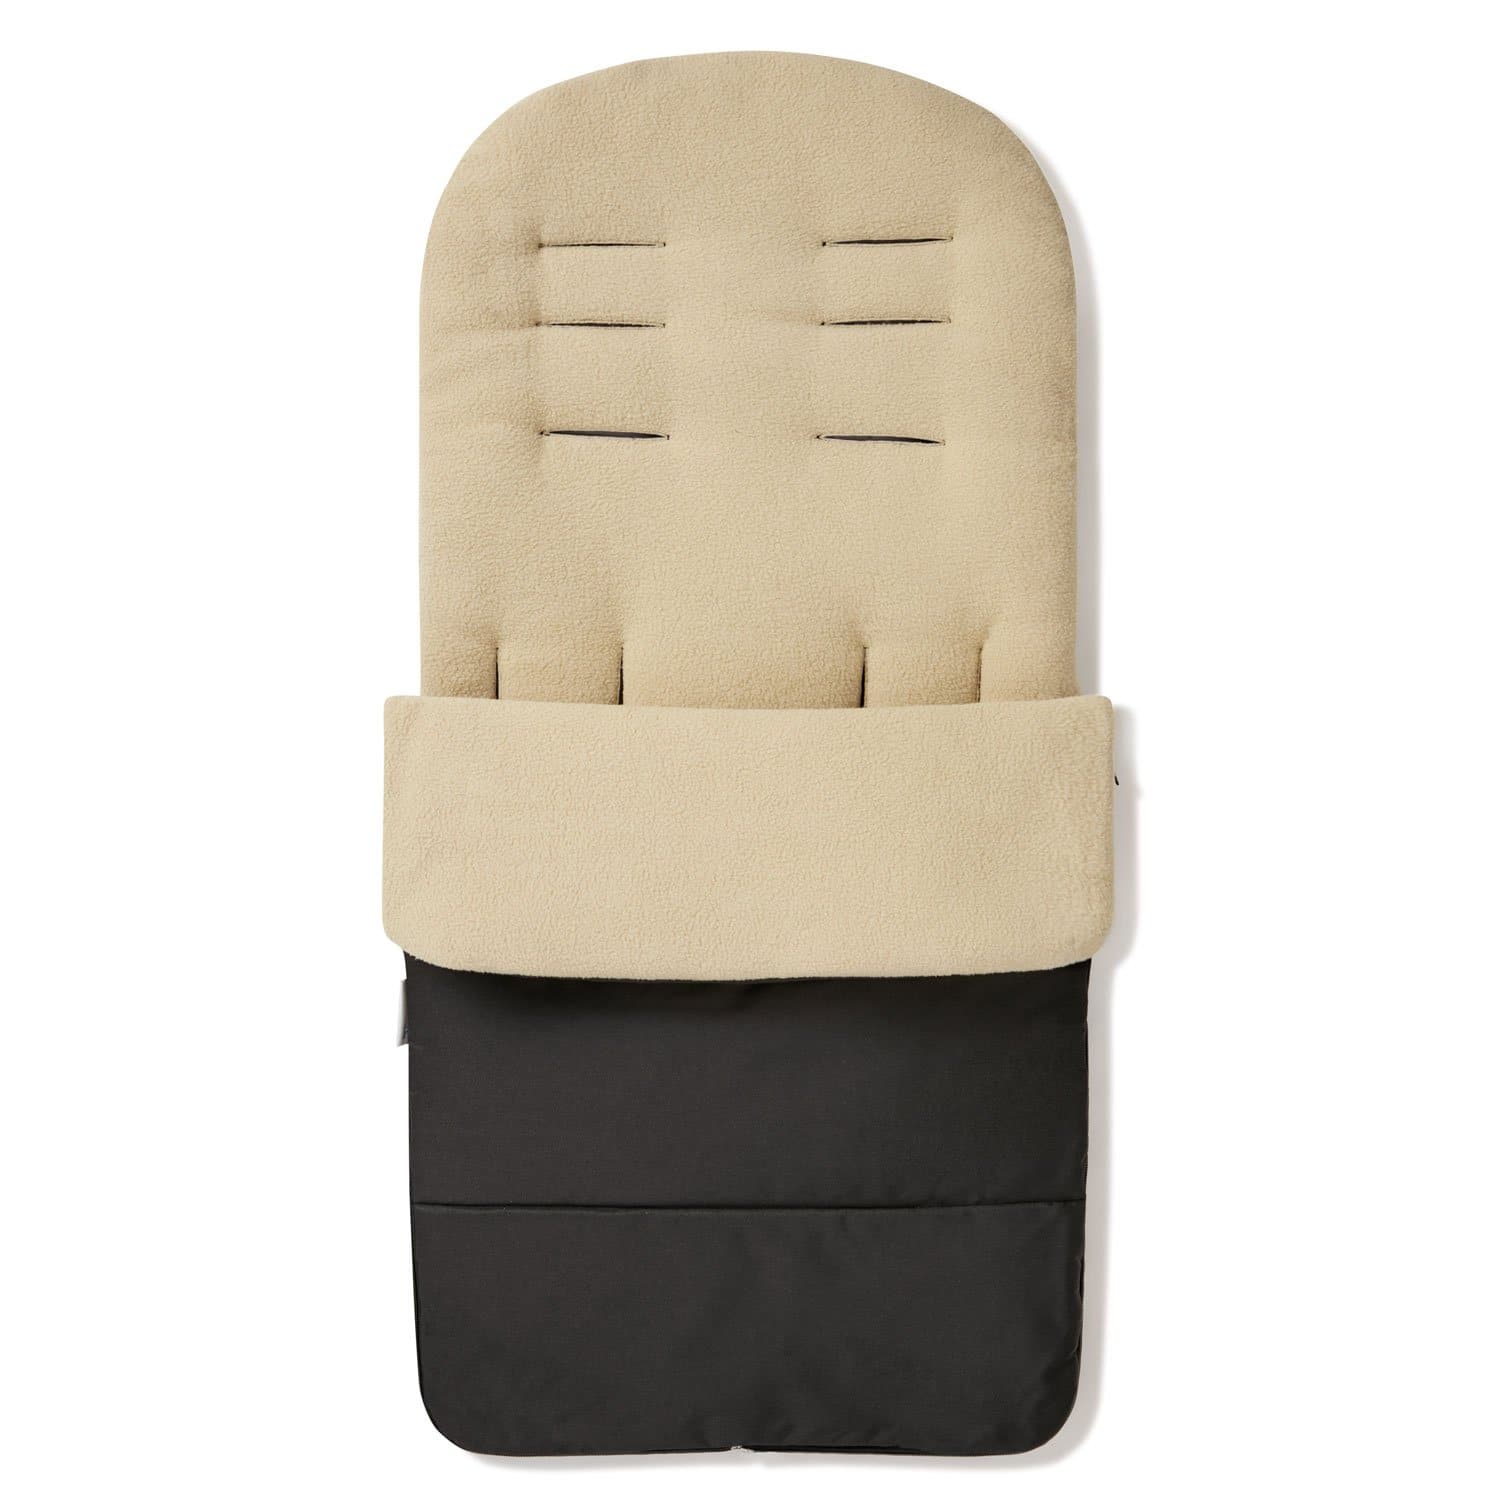 Premium Footmuff / Cosy Toes Compatible with Hybrid - Desert Sand / Fits All Models | For Your Little One